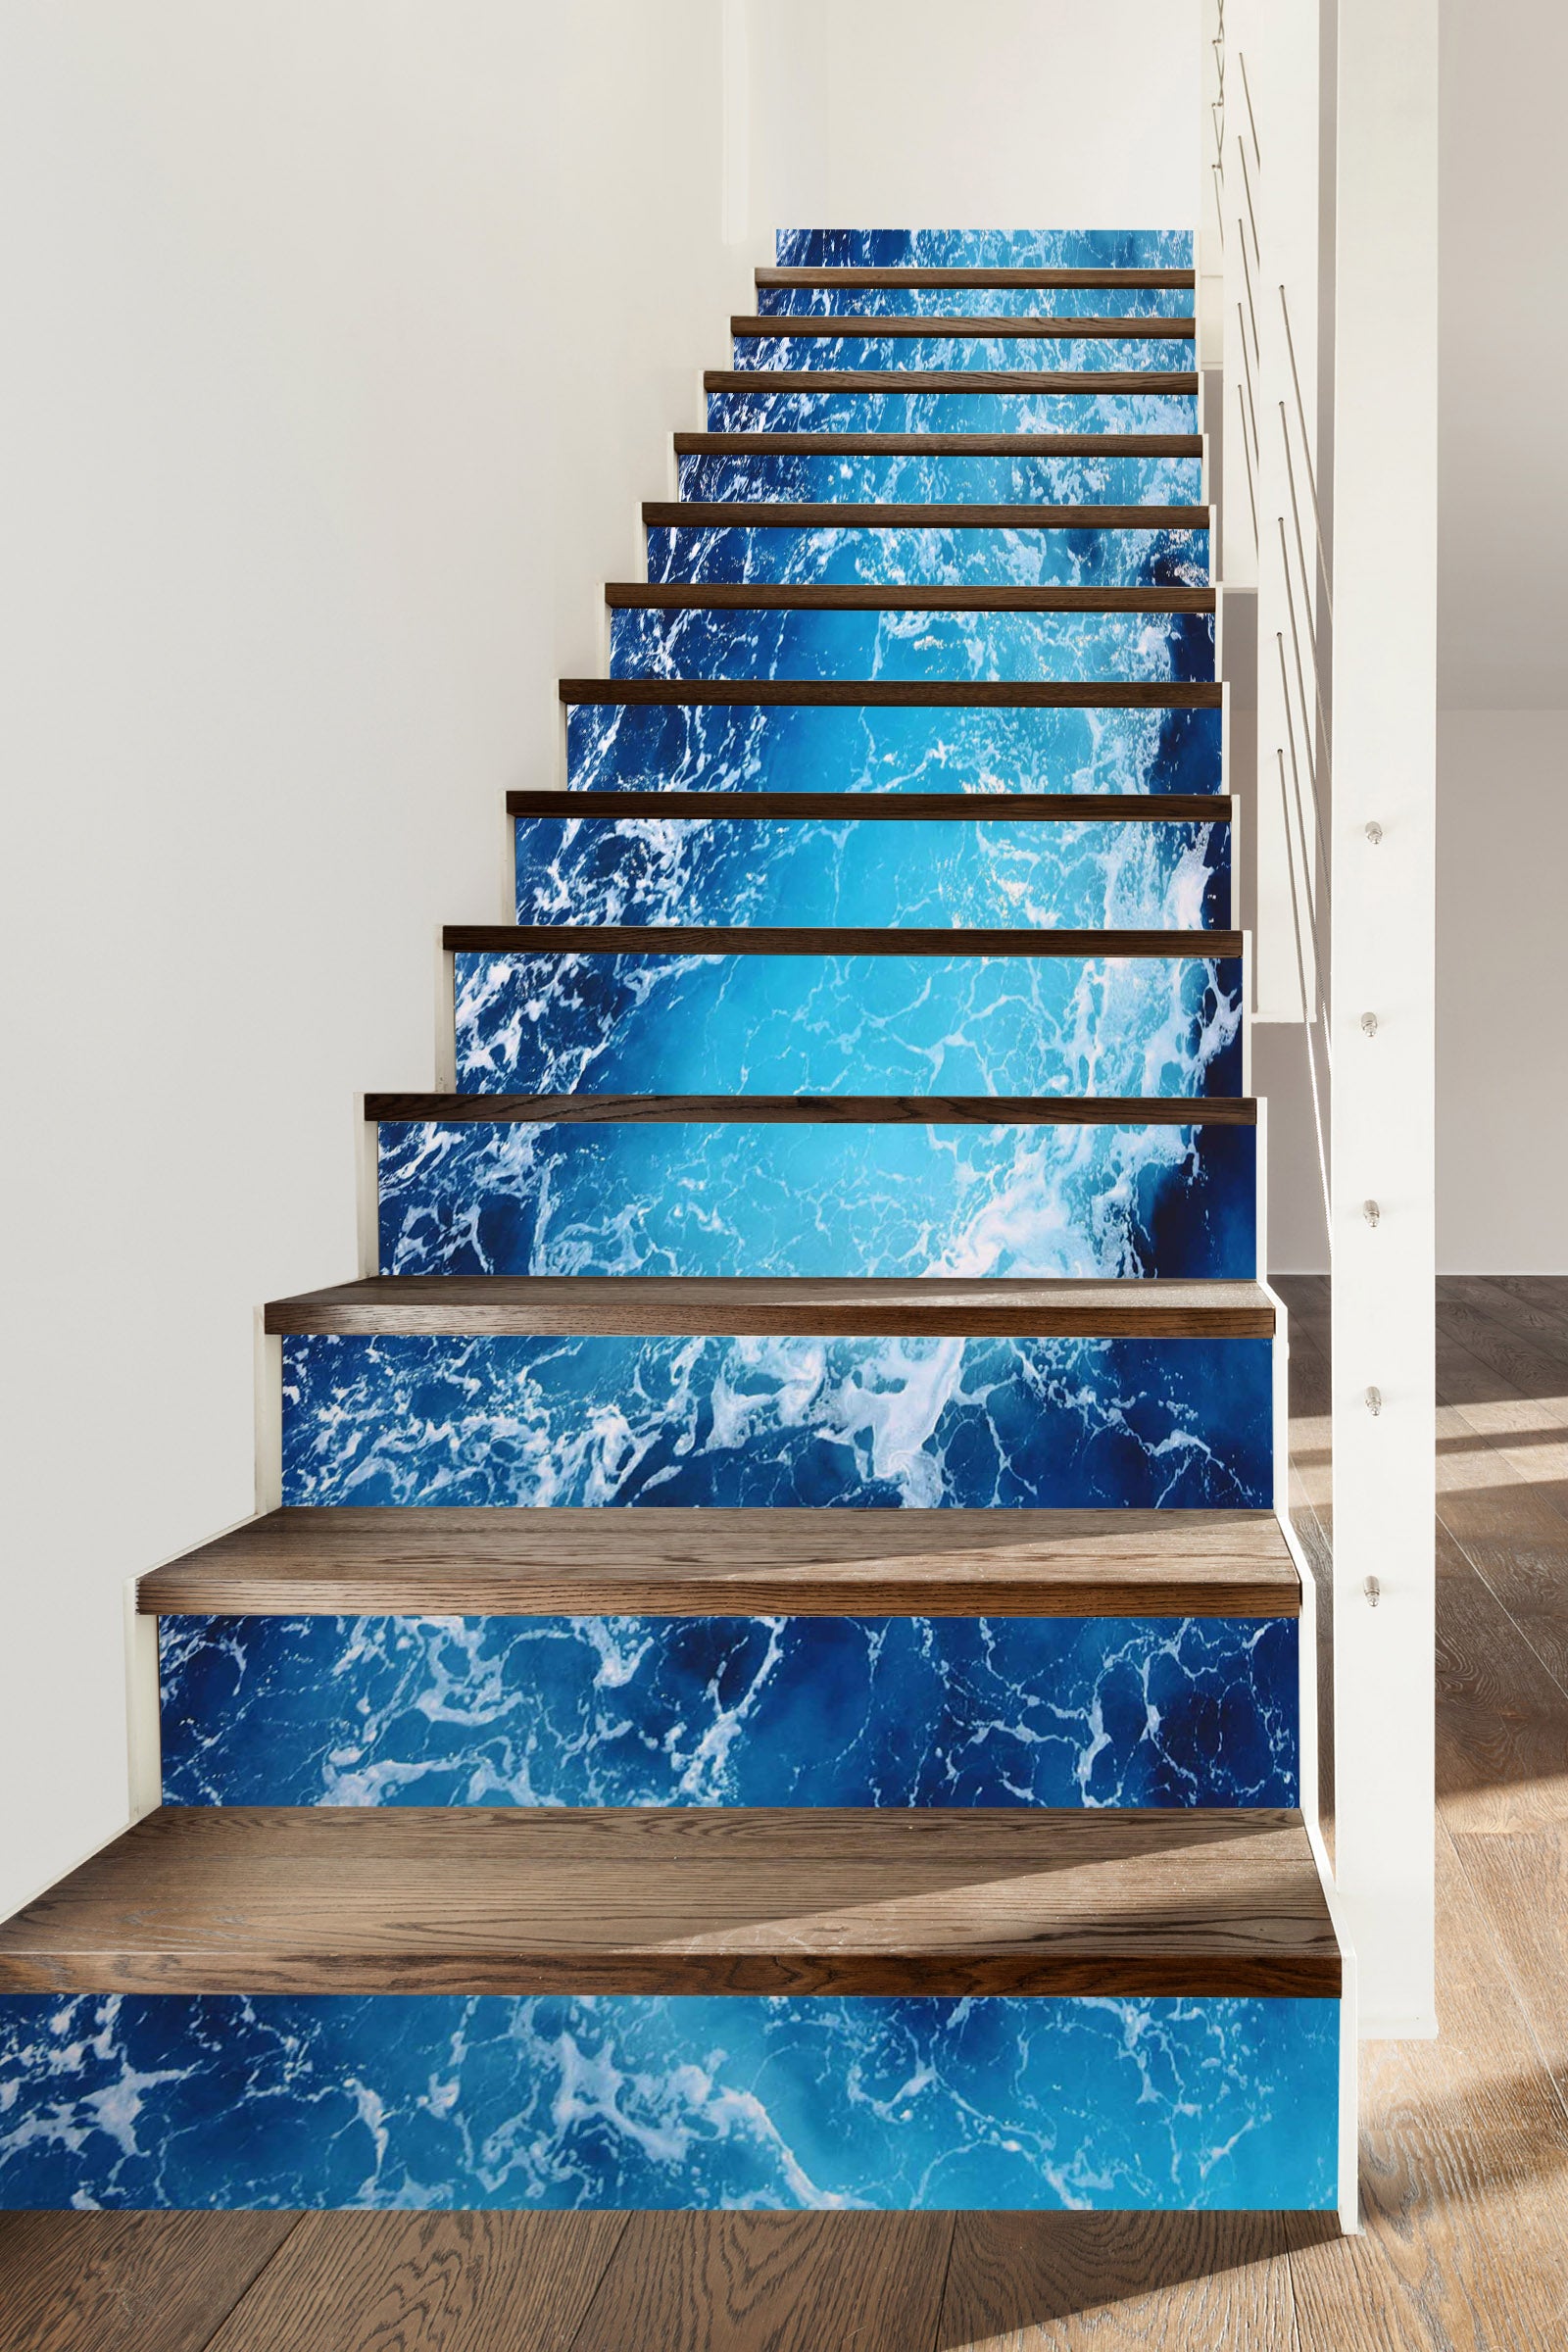 3D Tranquil Blue Lake 638 Stair Risers